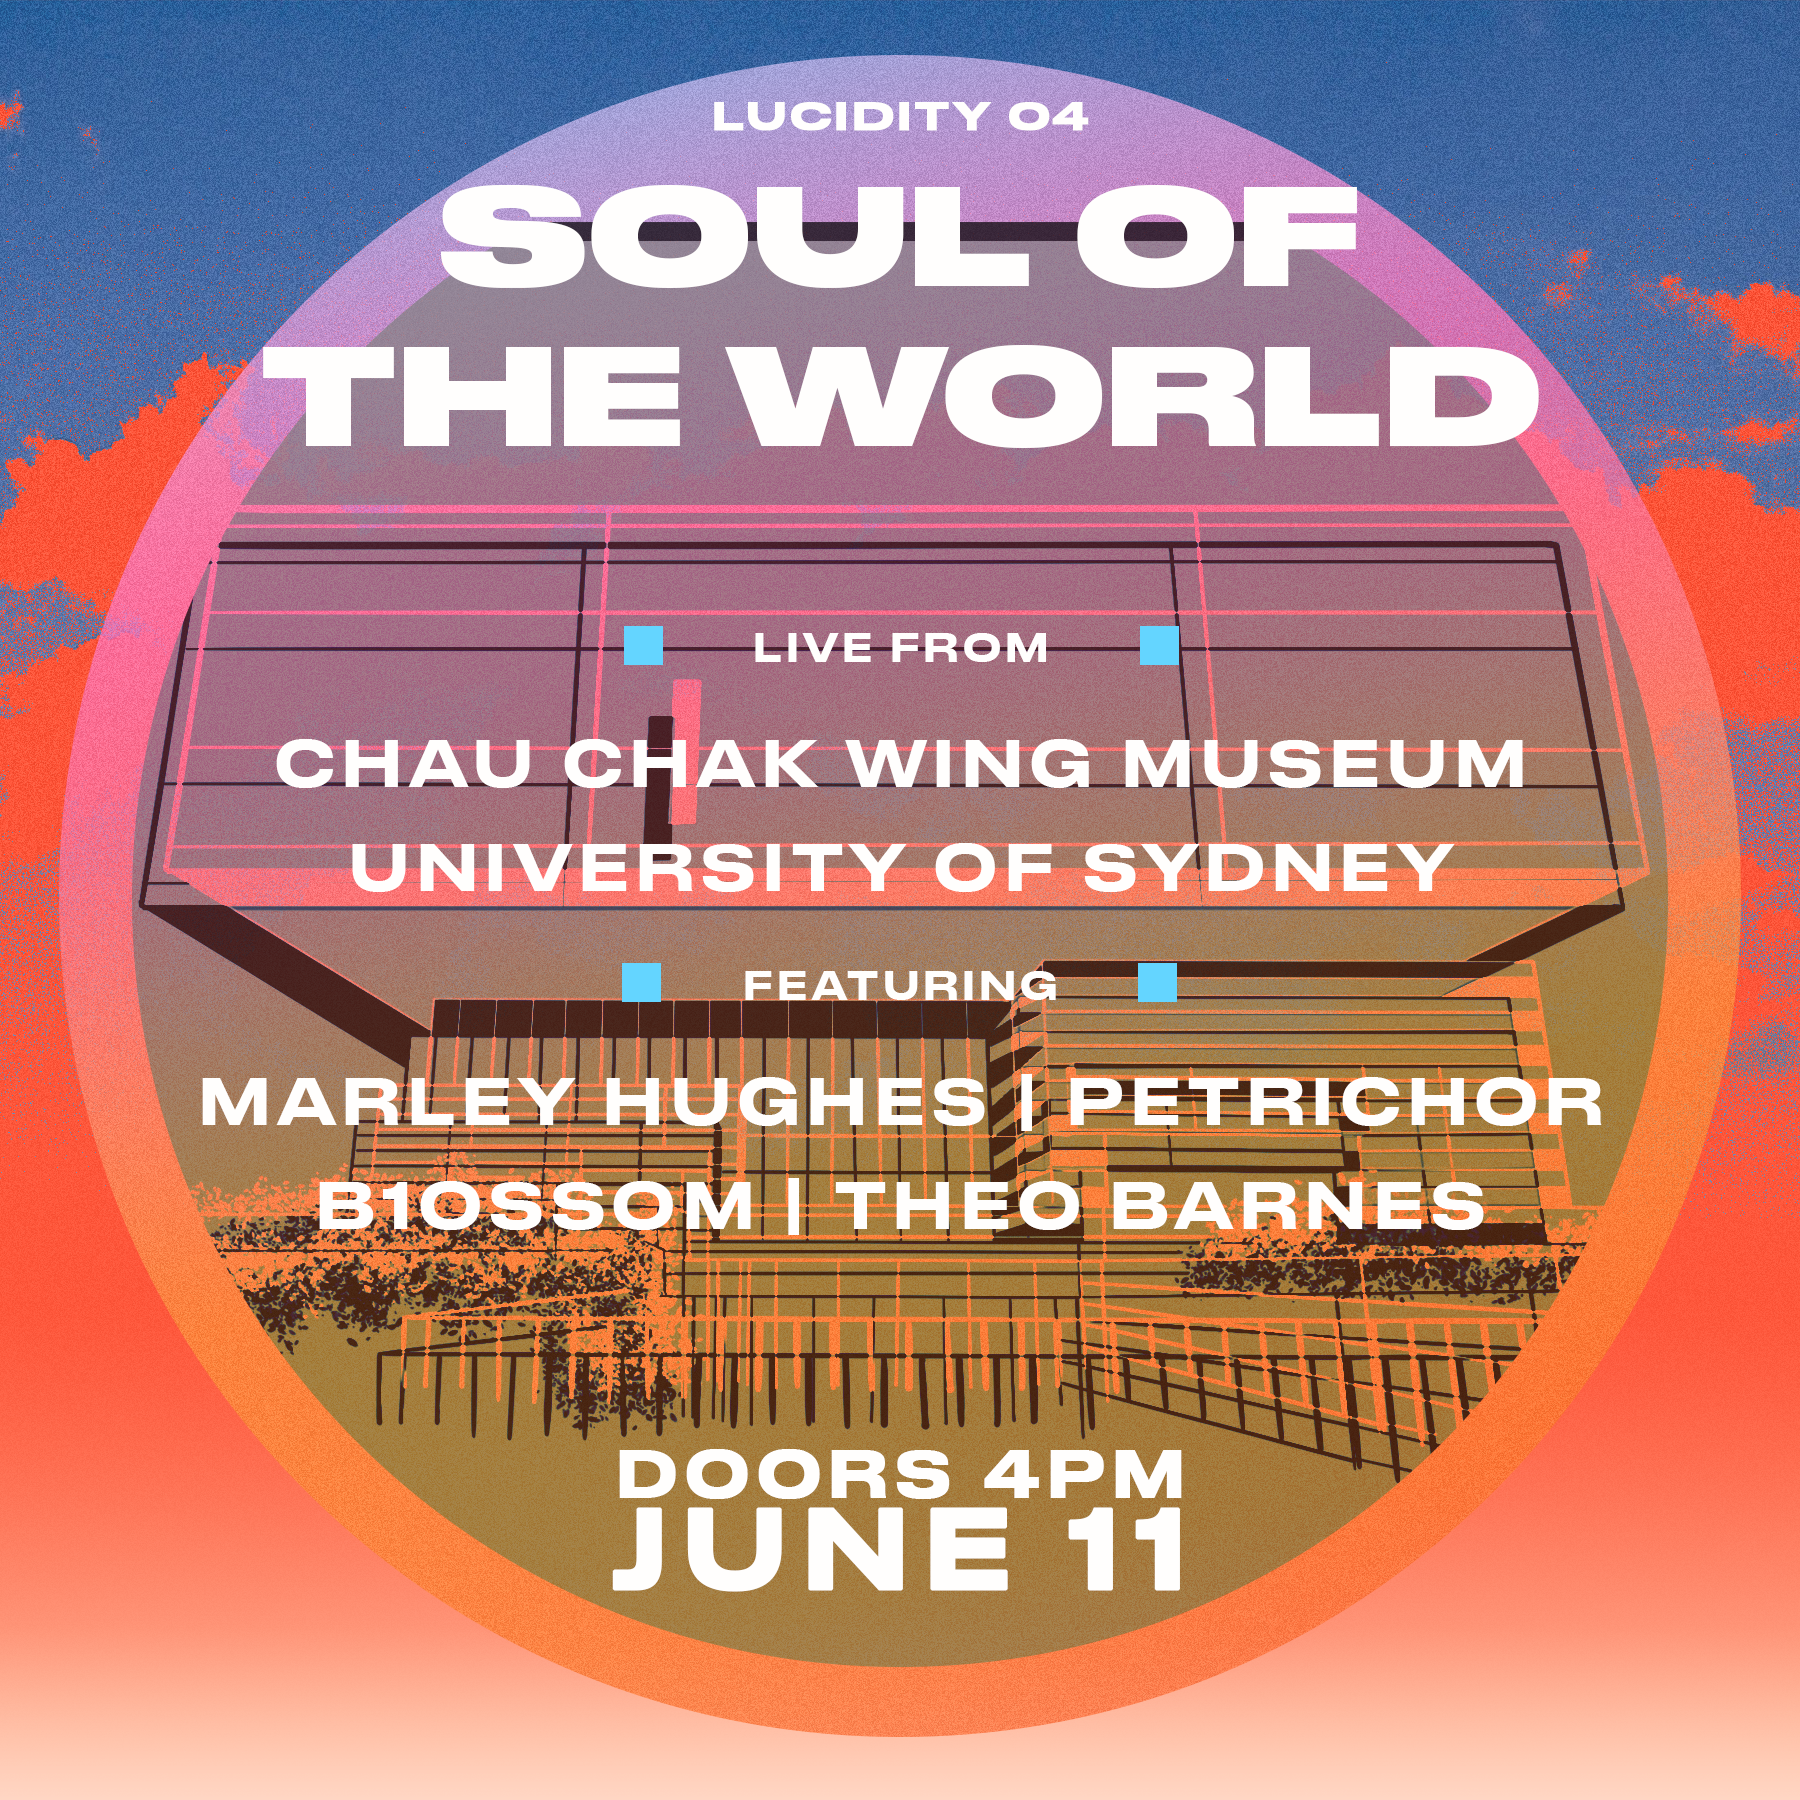 POSTPONED: LUCIDITY 04: SOUL OF THE WORLD - Página frontal